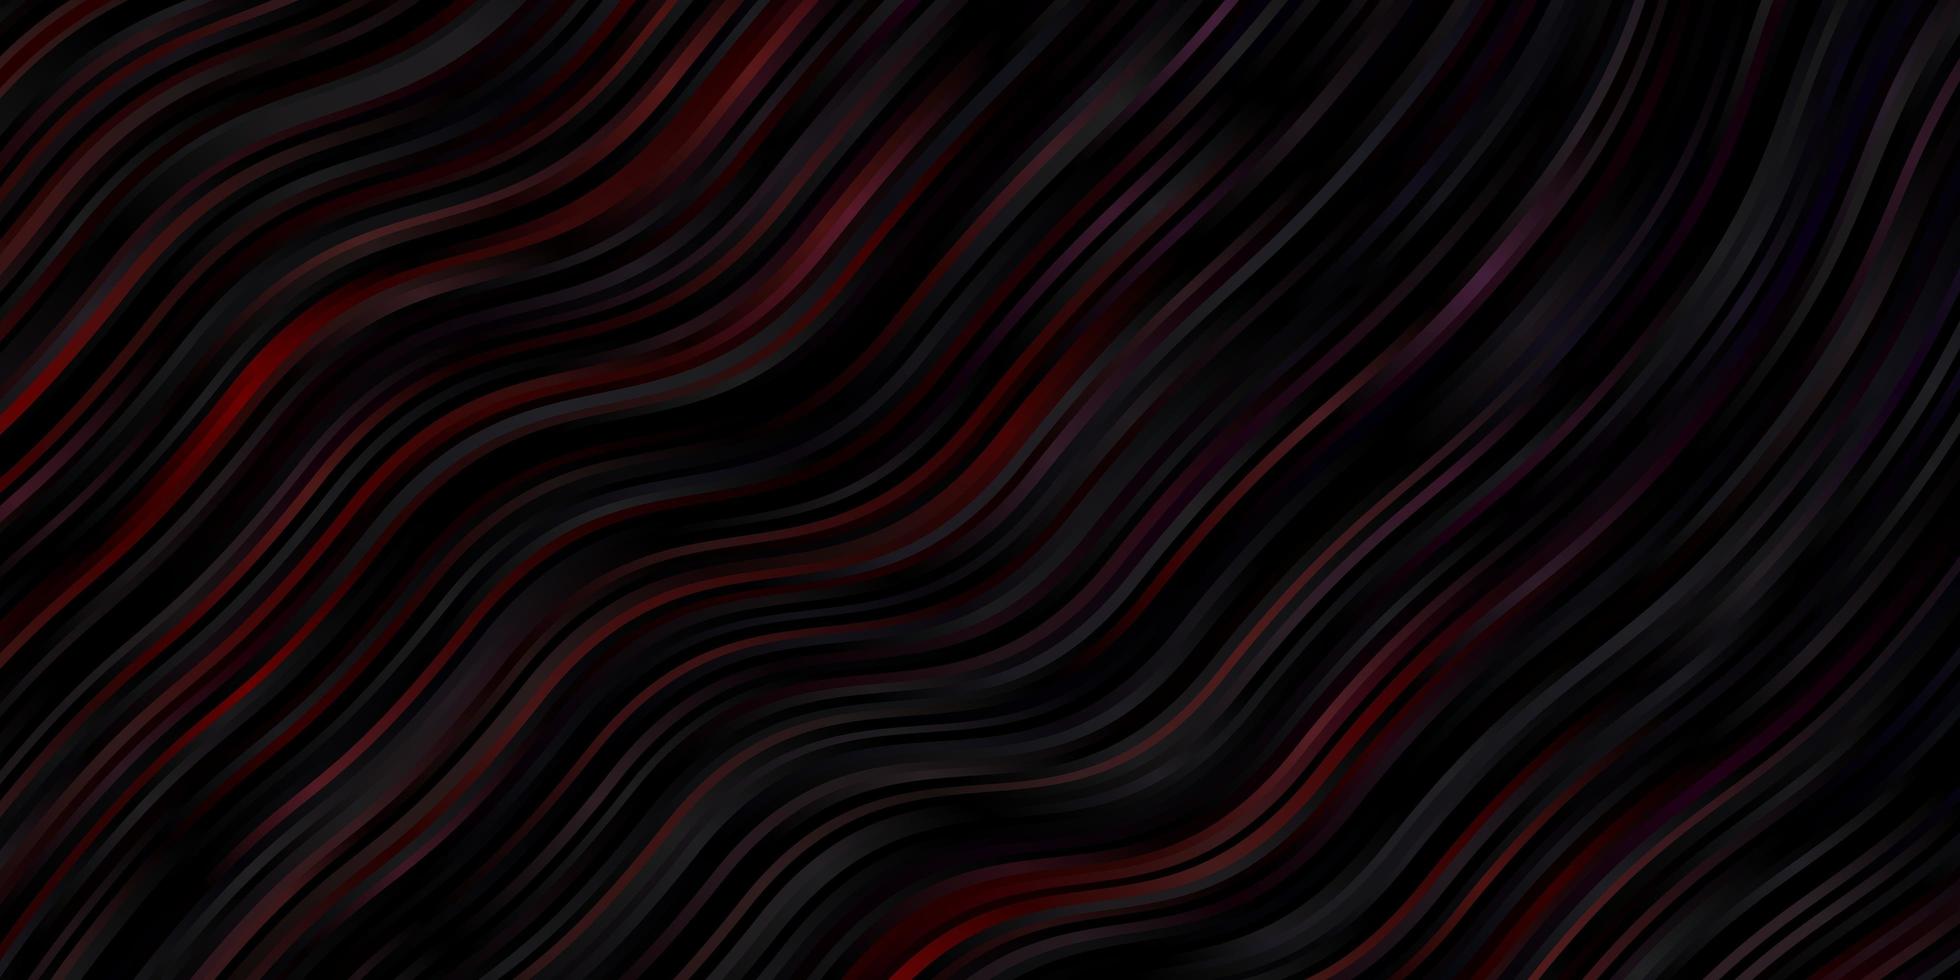 Dark Red vector background with curves. Abstract gradient illustration with wry lines. Pattern for booklets, leaflets.